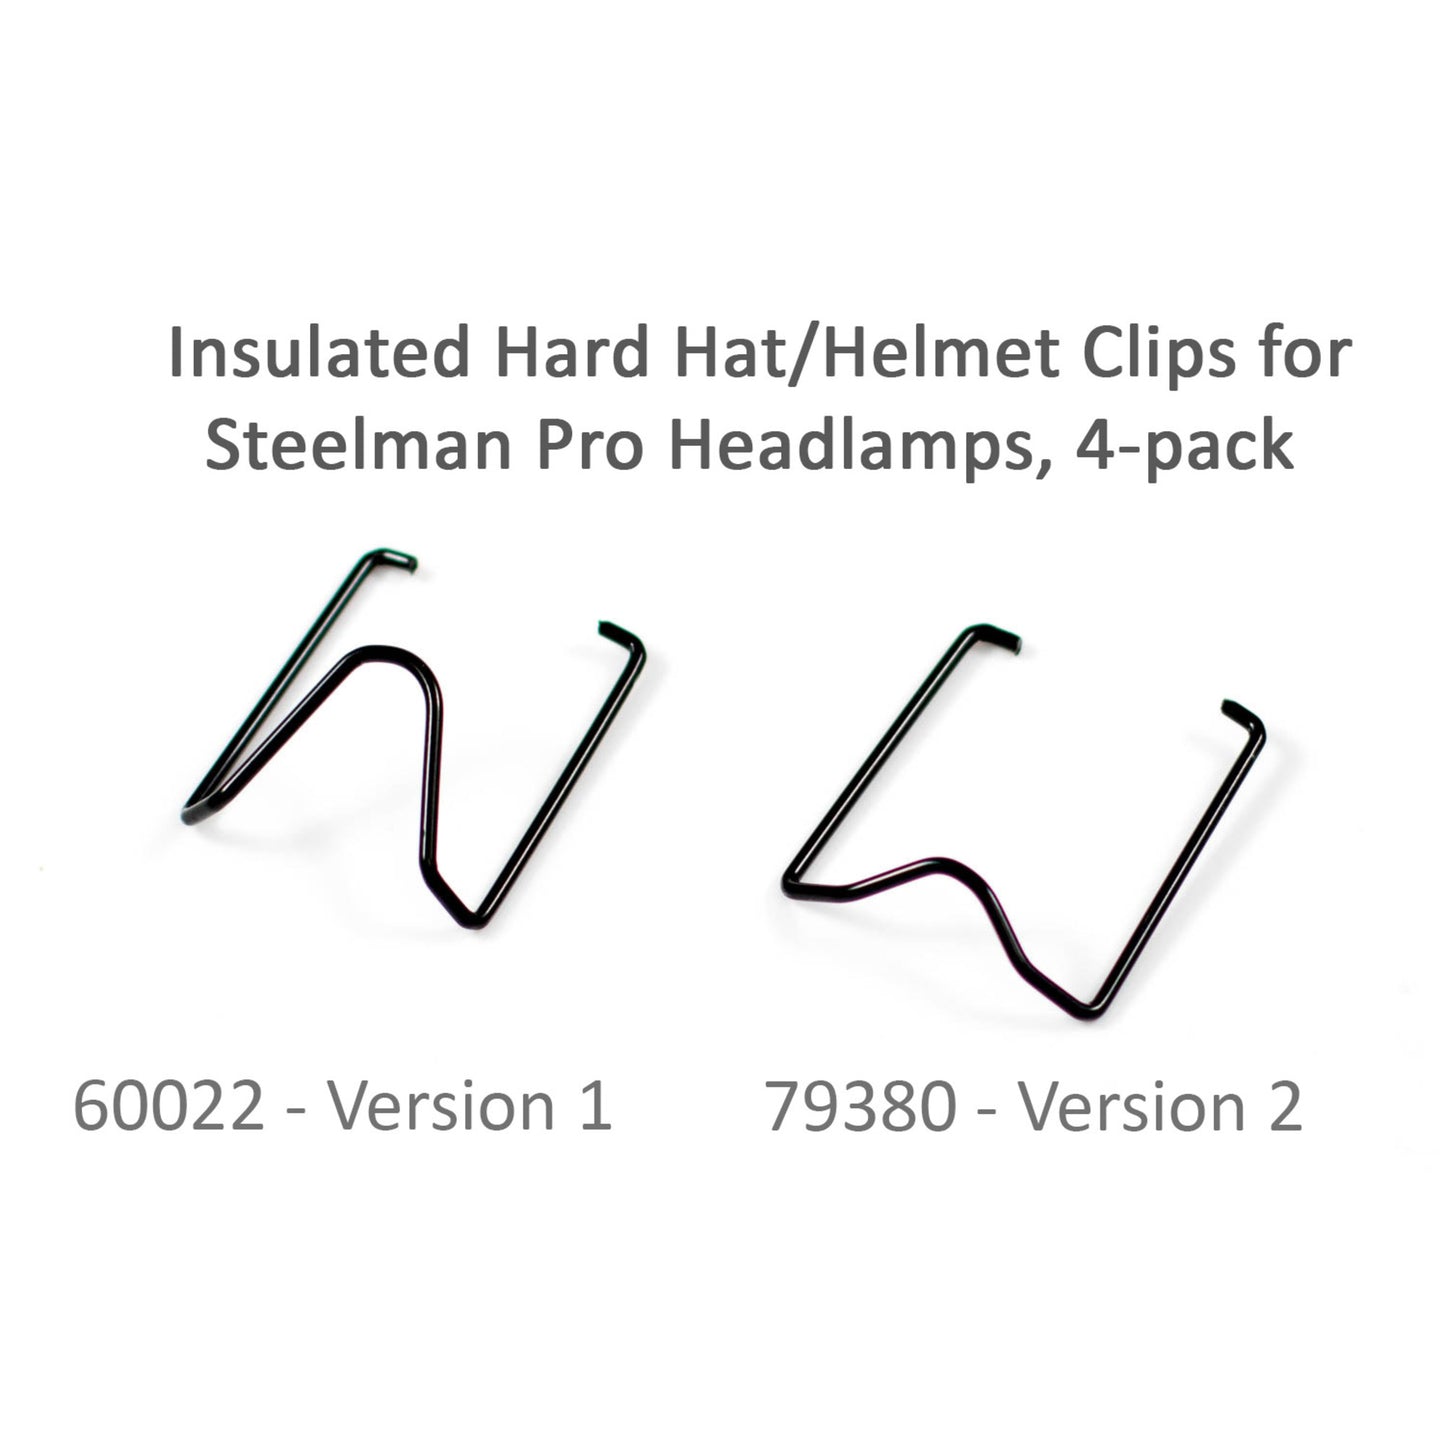 Insulated Hard Hat / Helmet Headlamp Attachment Clips, 4-pack